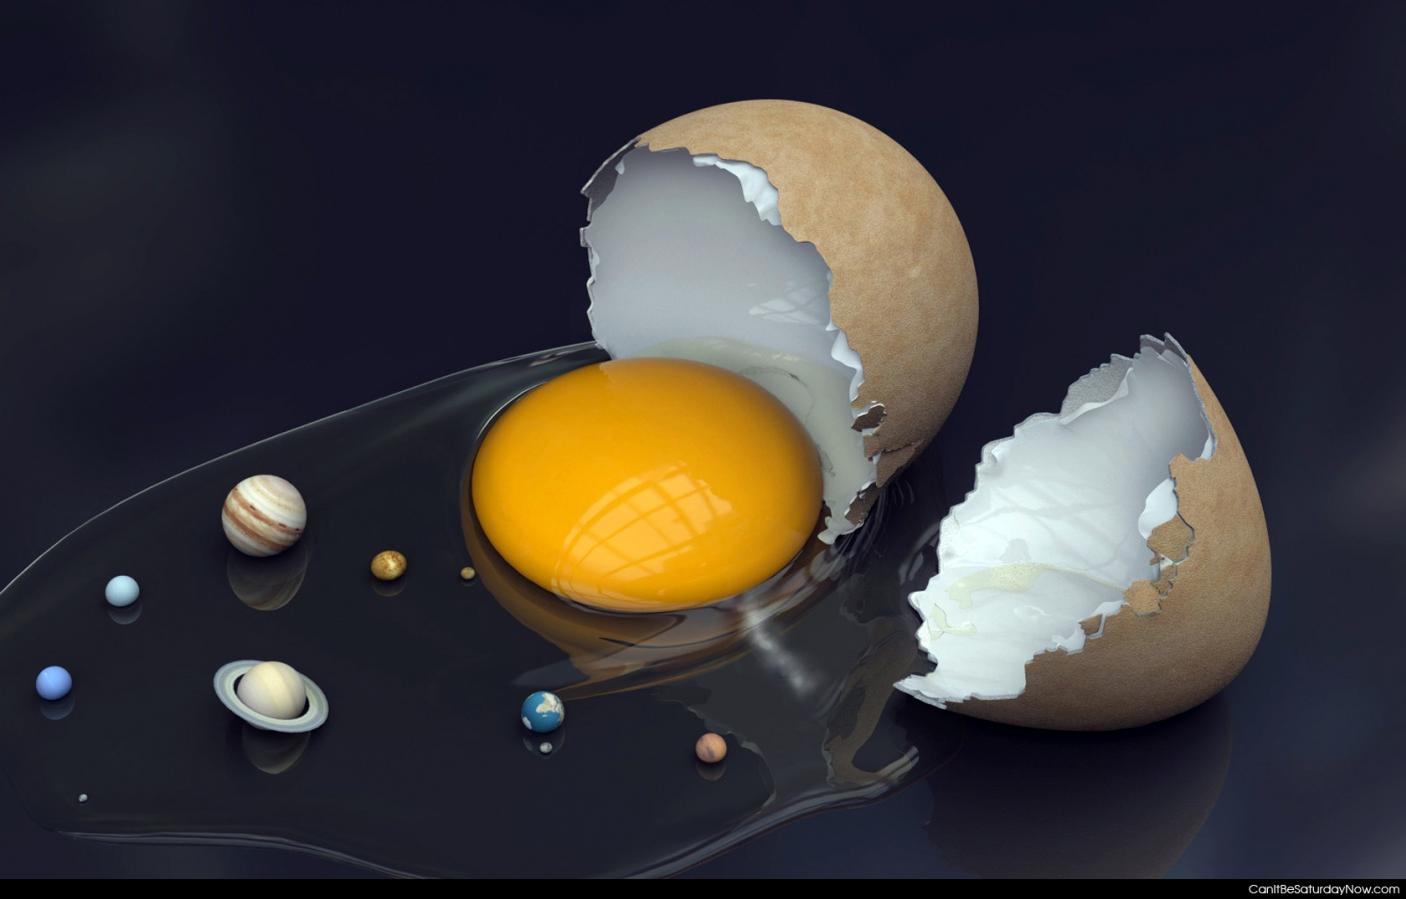 Egg universe - our universe is from an egg?